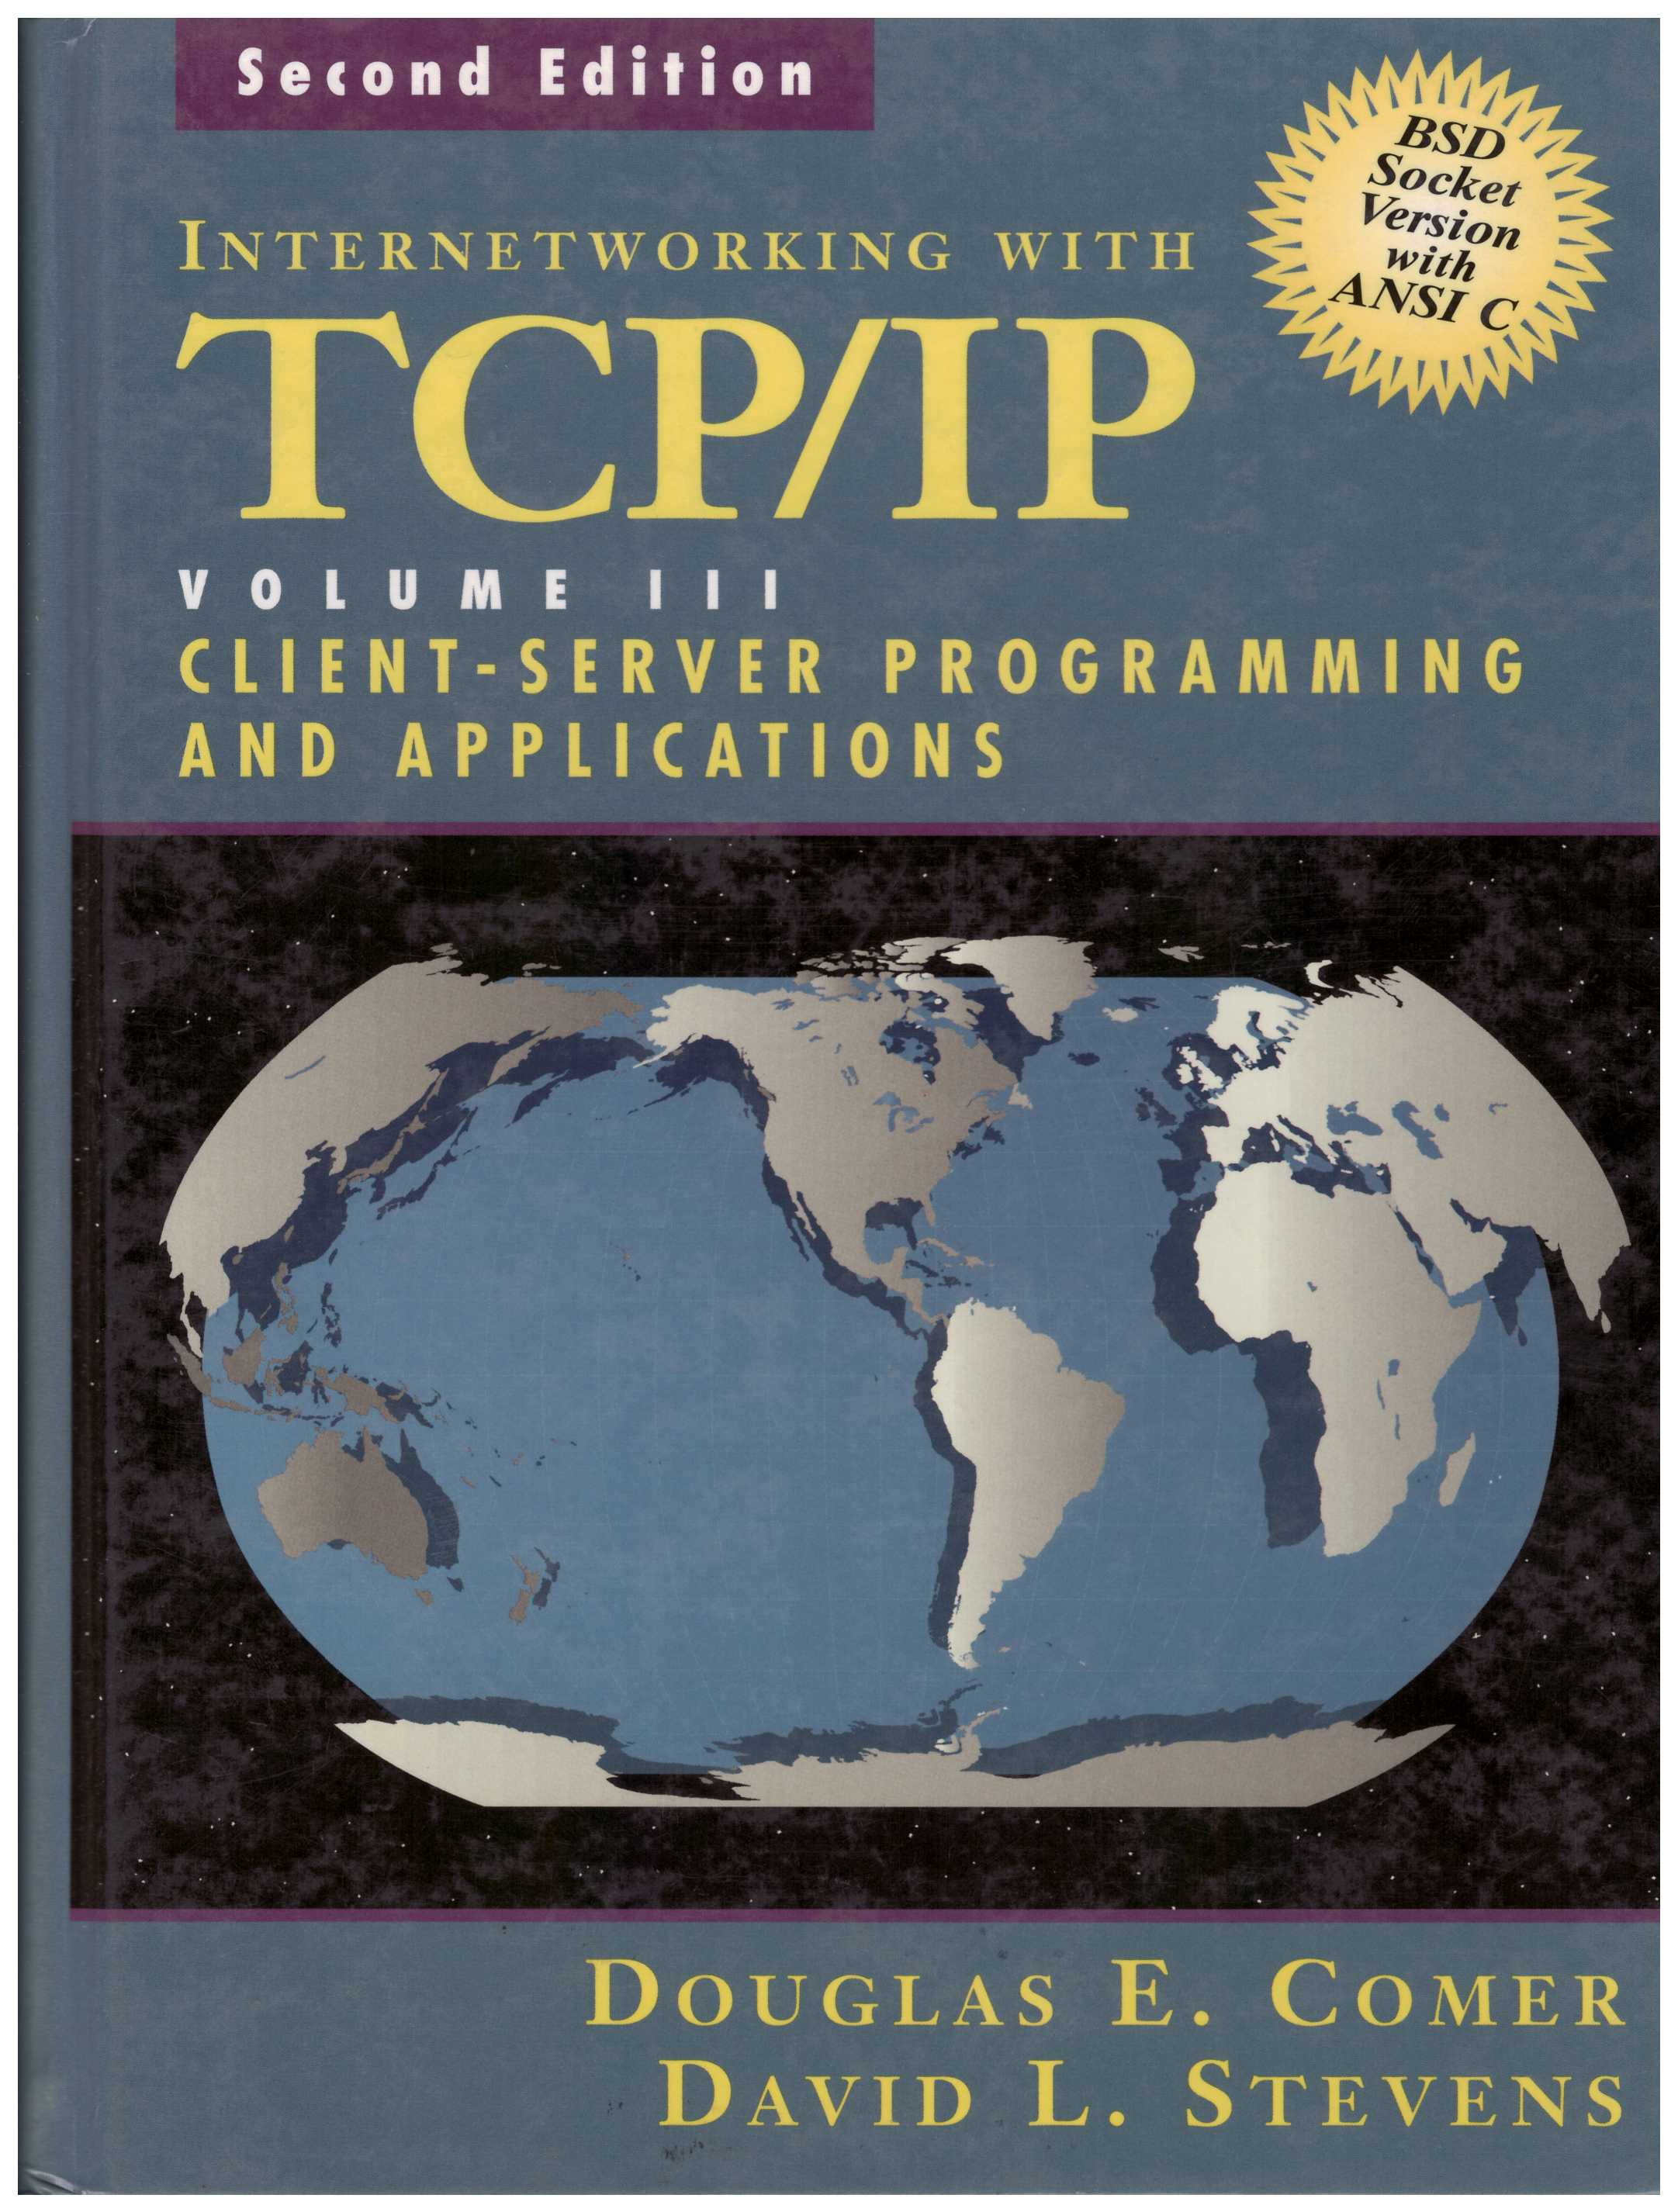 Internetworking with Tcp/IP Vol. II: ANSI C Version: Design, Implementation, and Internals